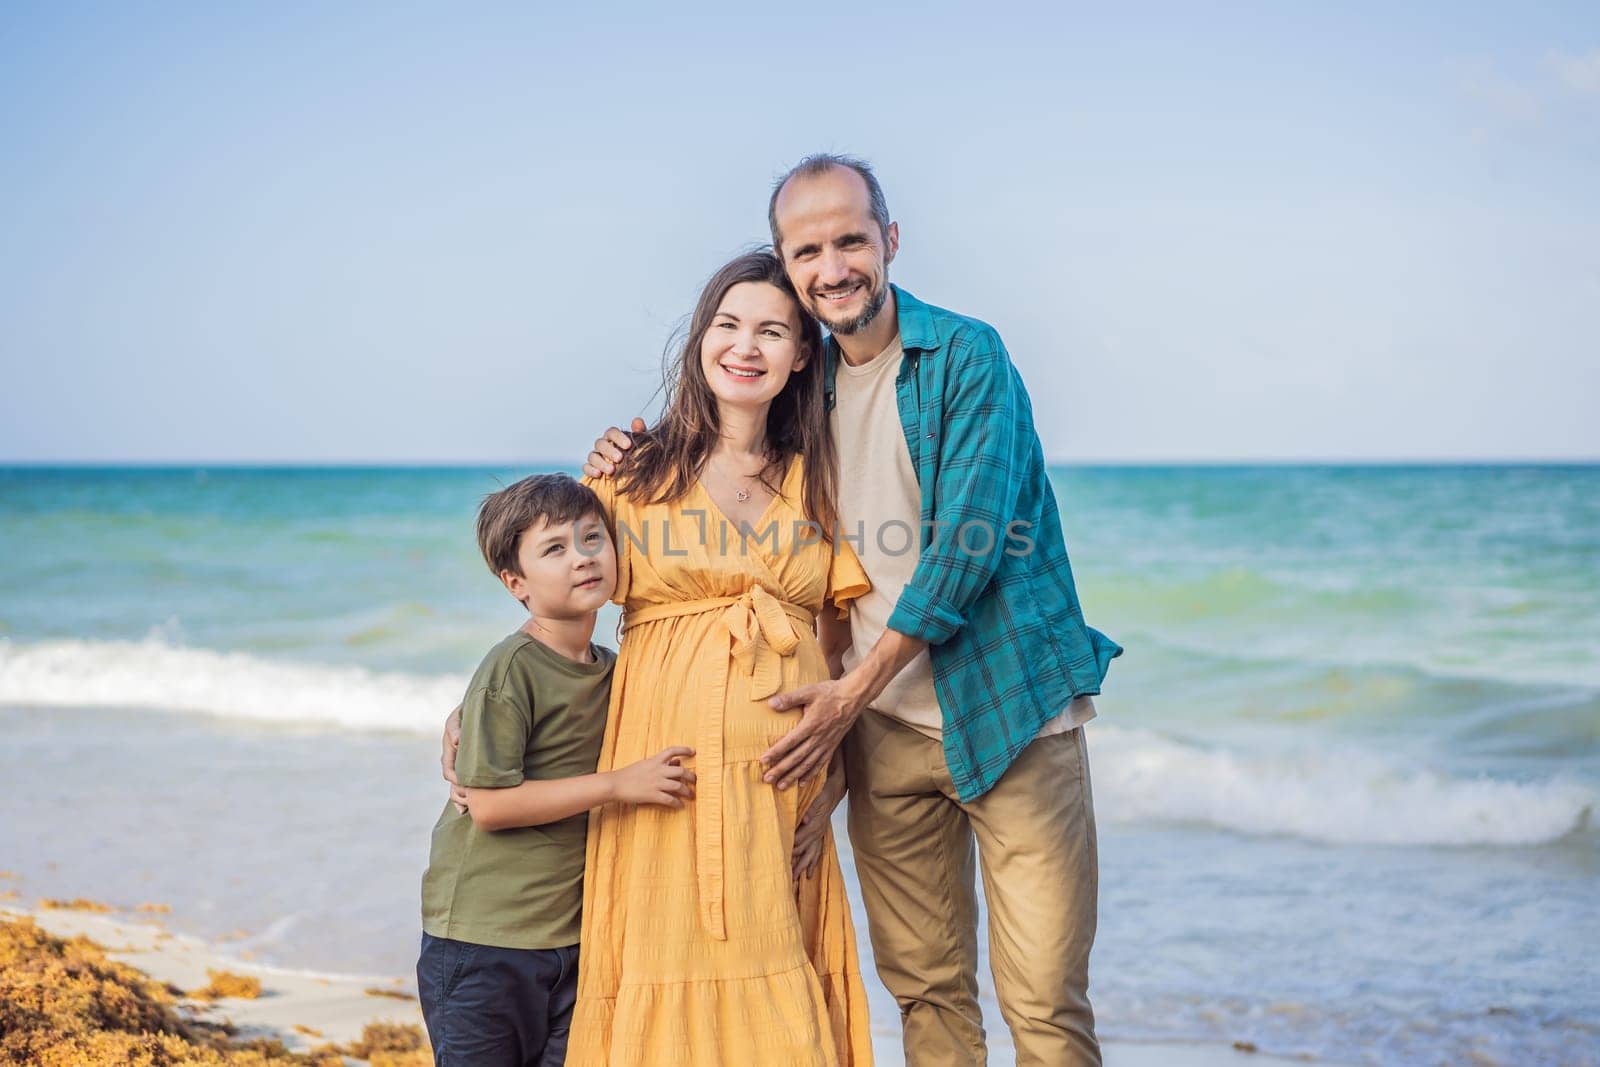 A loving family enjoying tropical beach - a radiant pregnant woman after 40, embraced by her husband, and accompanied by their adult teenage son, savoring precious moments together amidst nature's beauty. Pregnancy after 40 concept by galitskaya